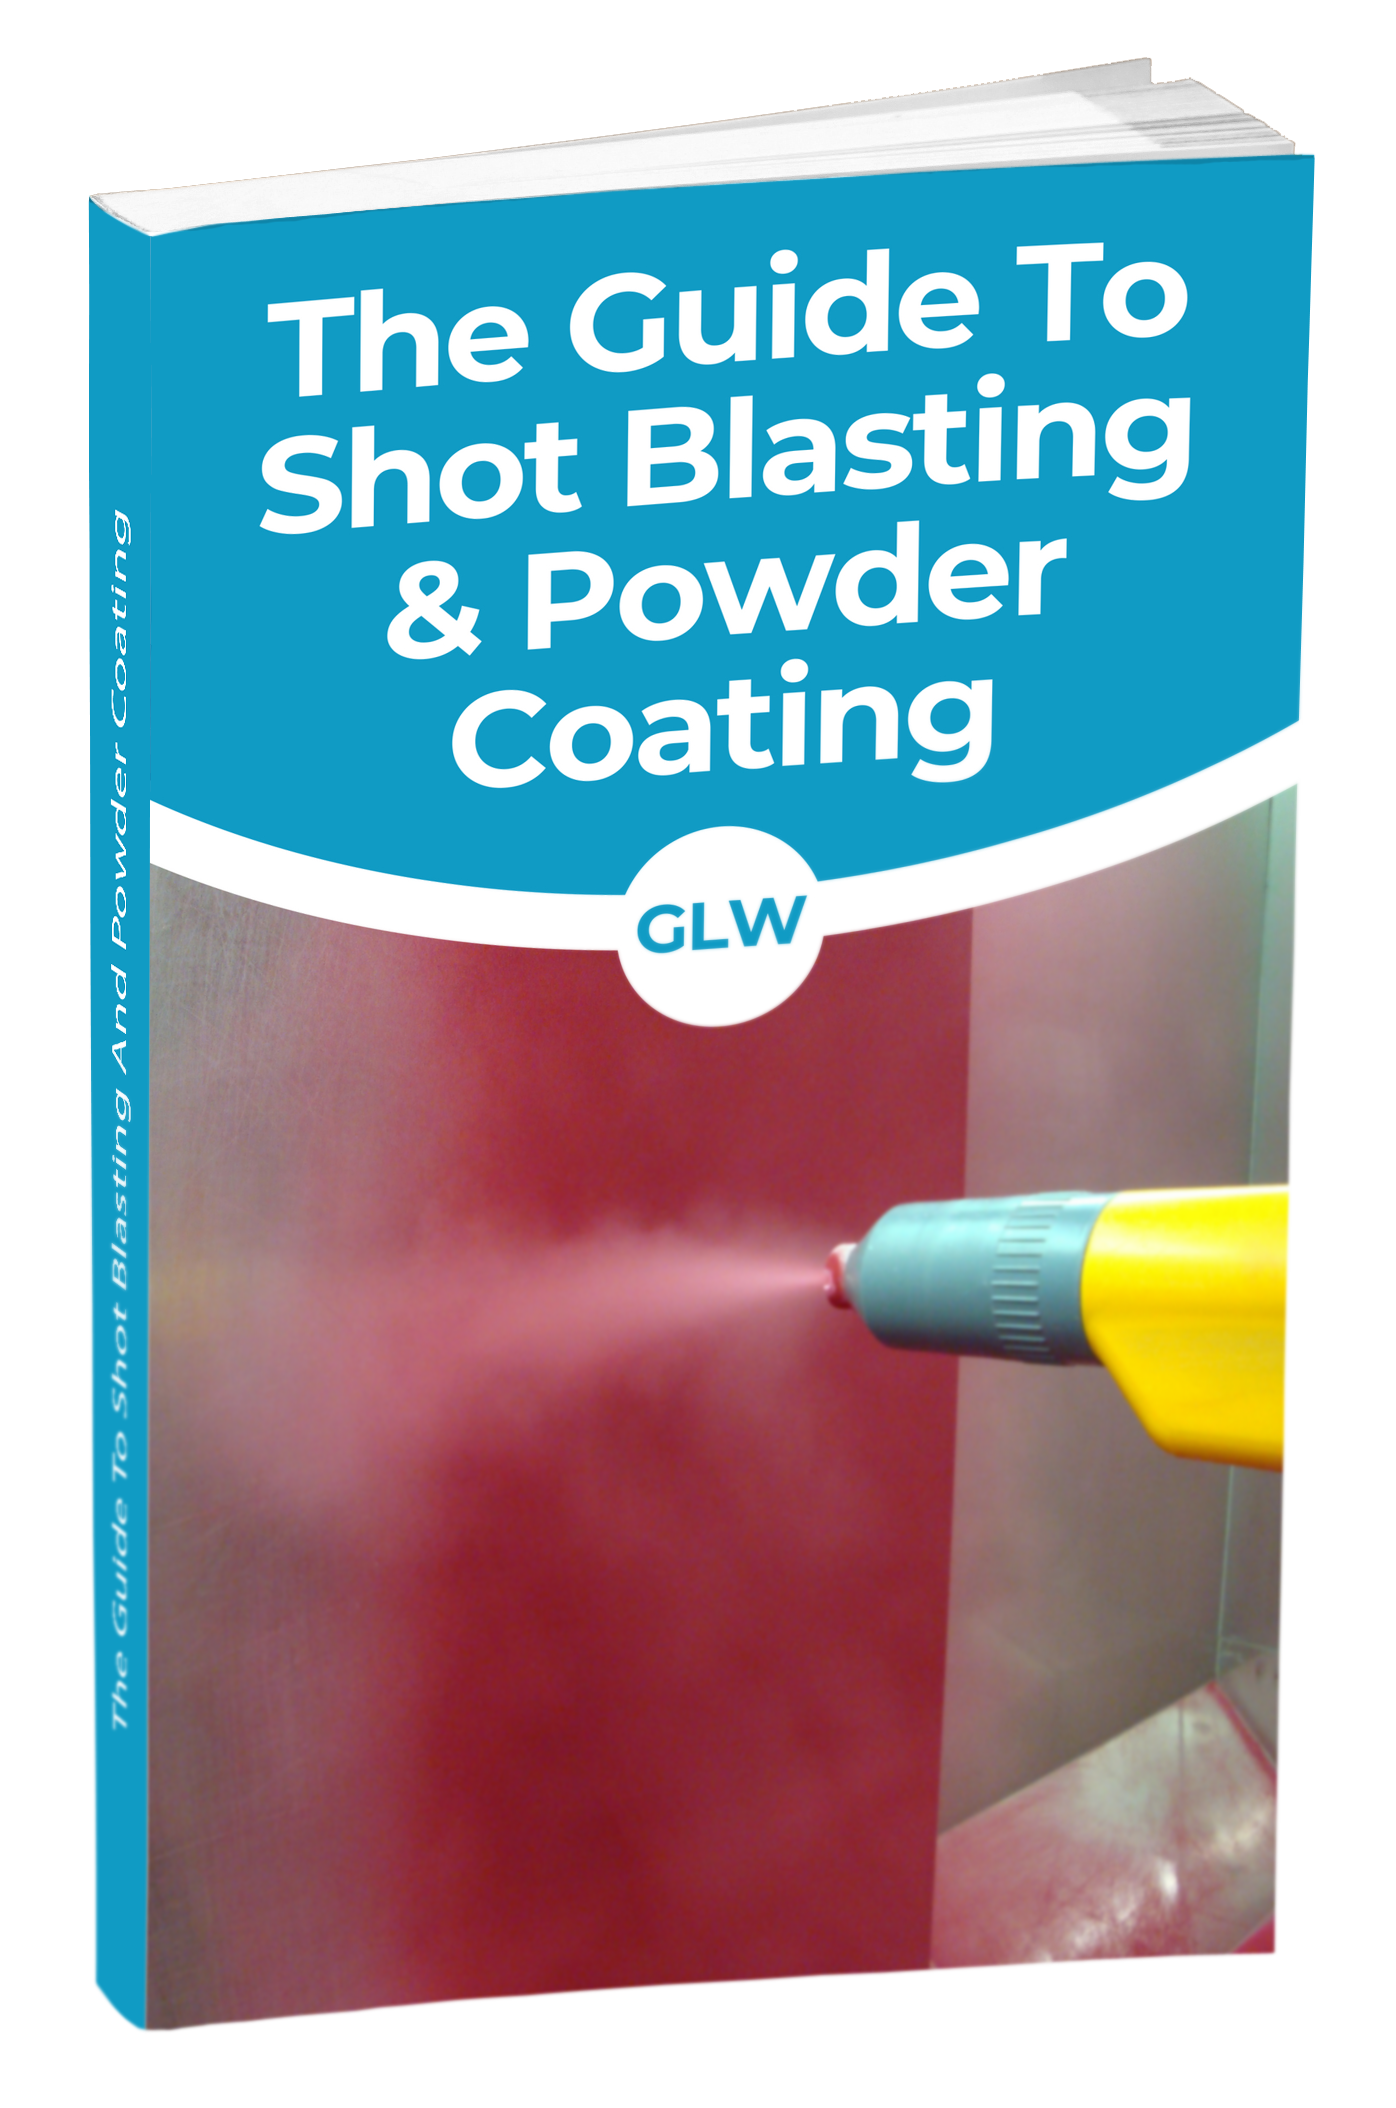 GLW Guide Cover Mock UP